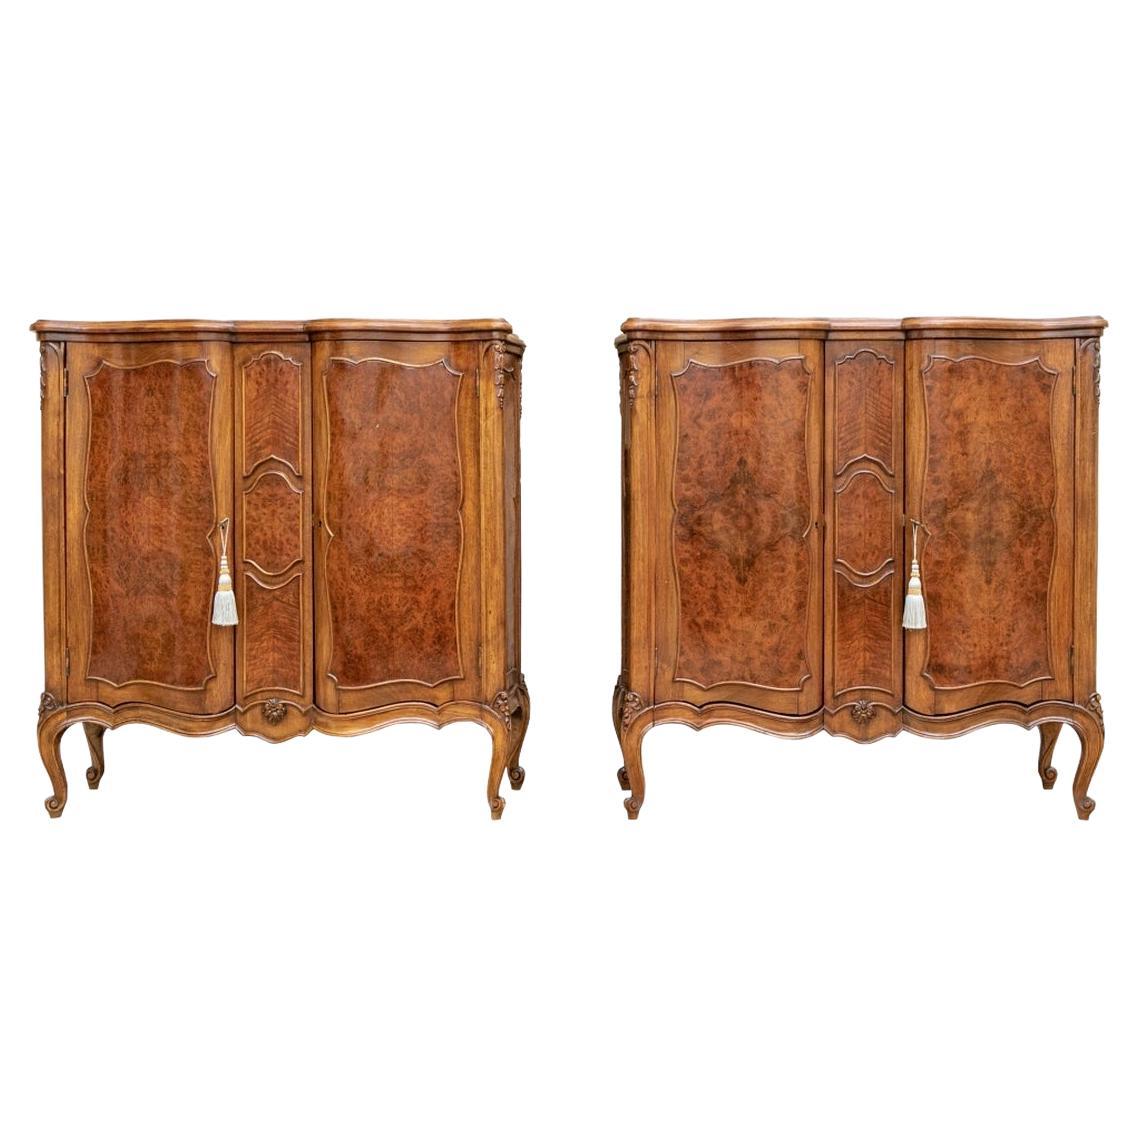 Fine Pair of Classic French Style Figured Wood Veneer Cabinets For Sale